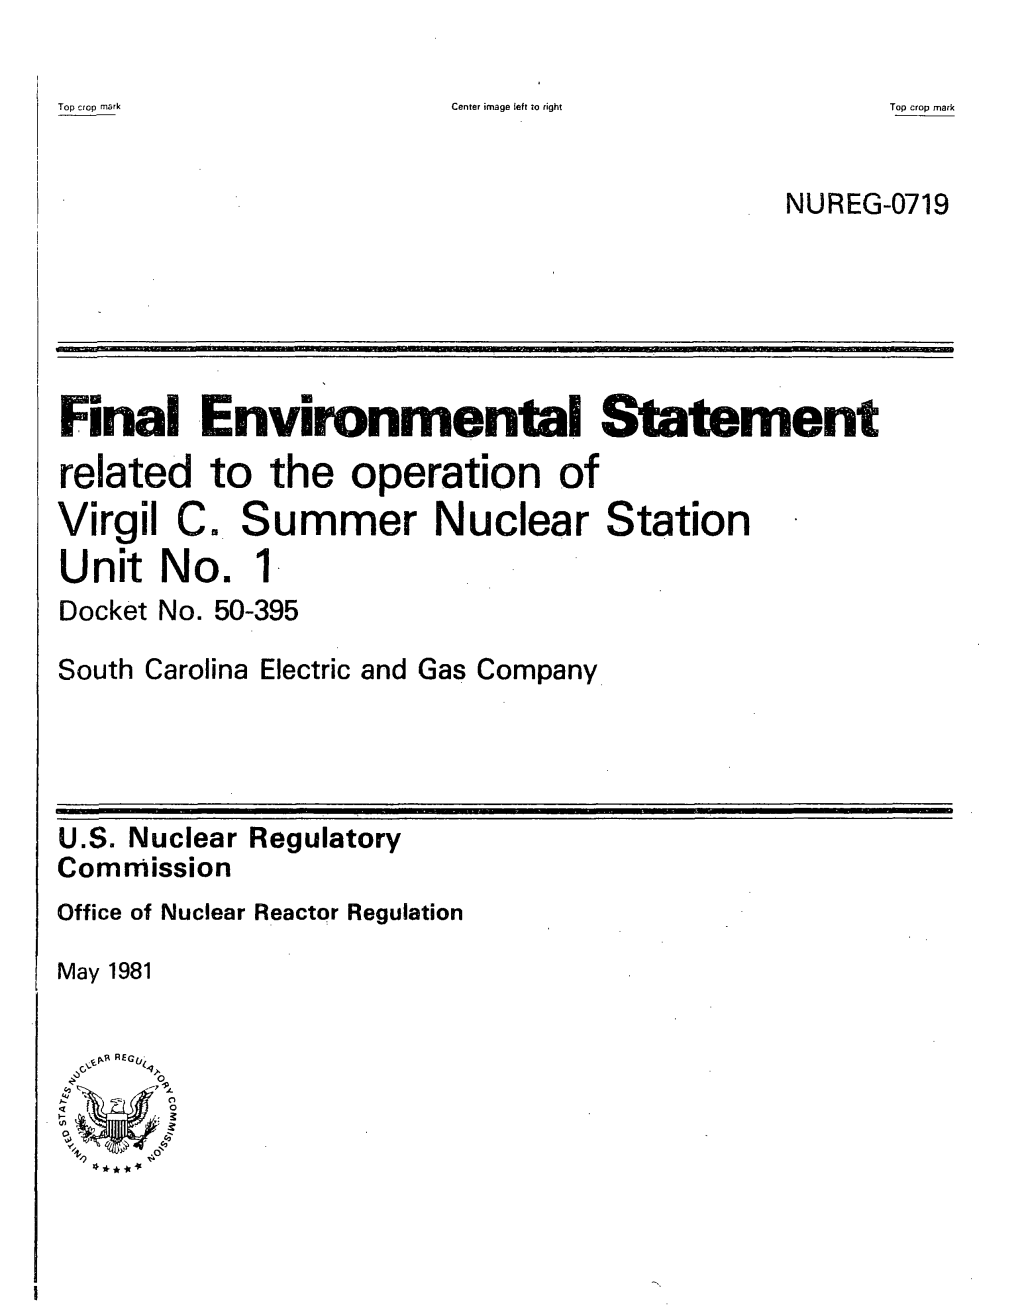 Final Environmental Statement Related to the Operation of Virgil C